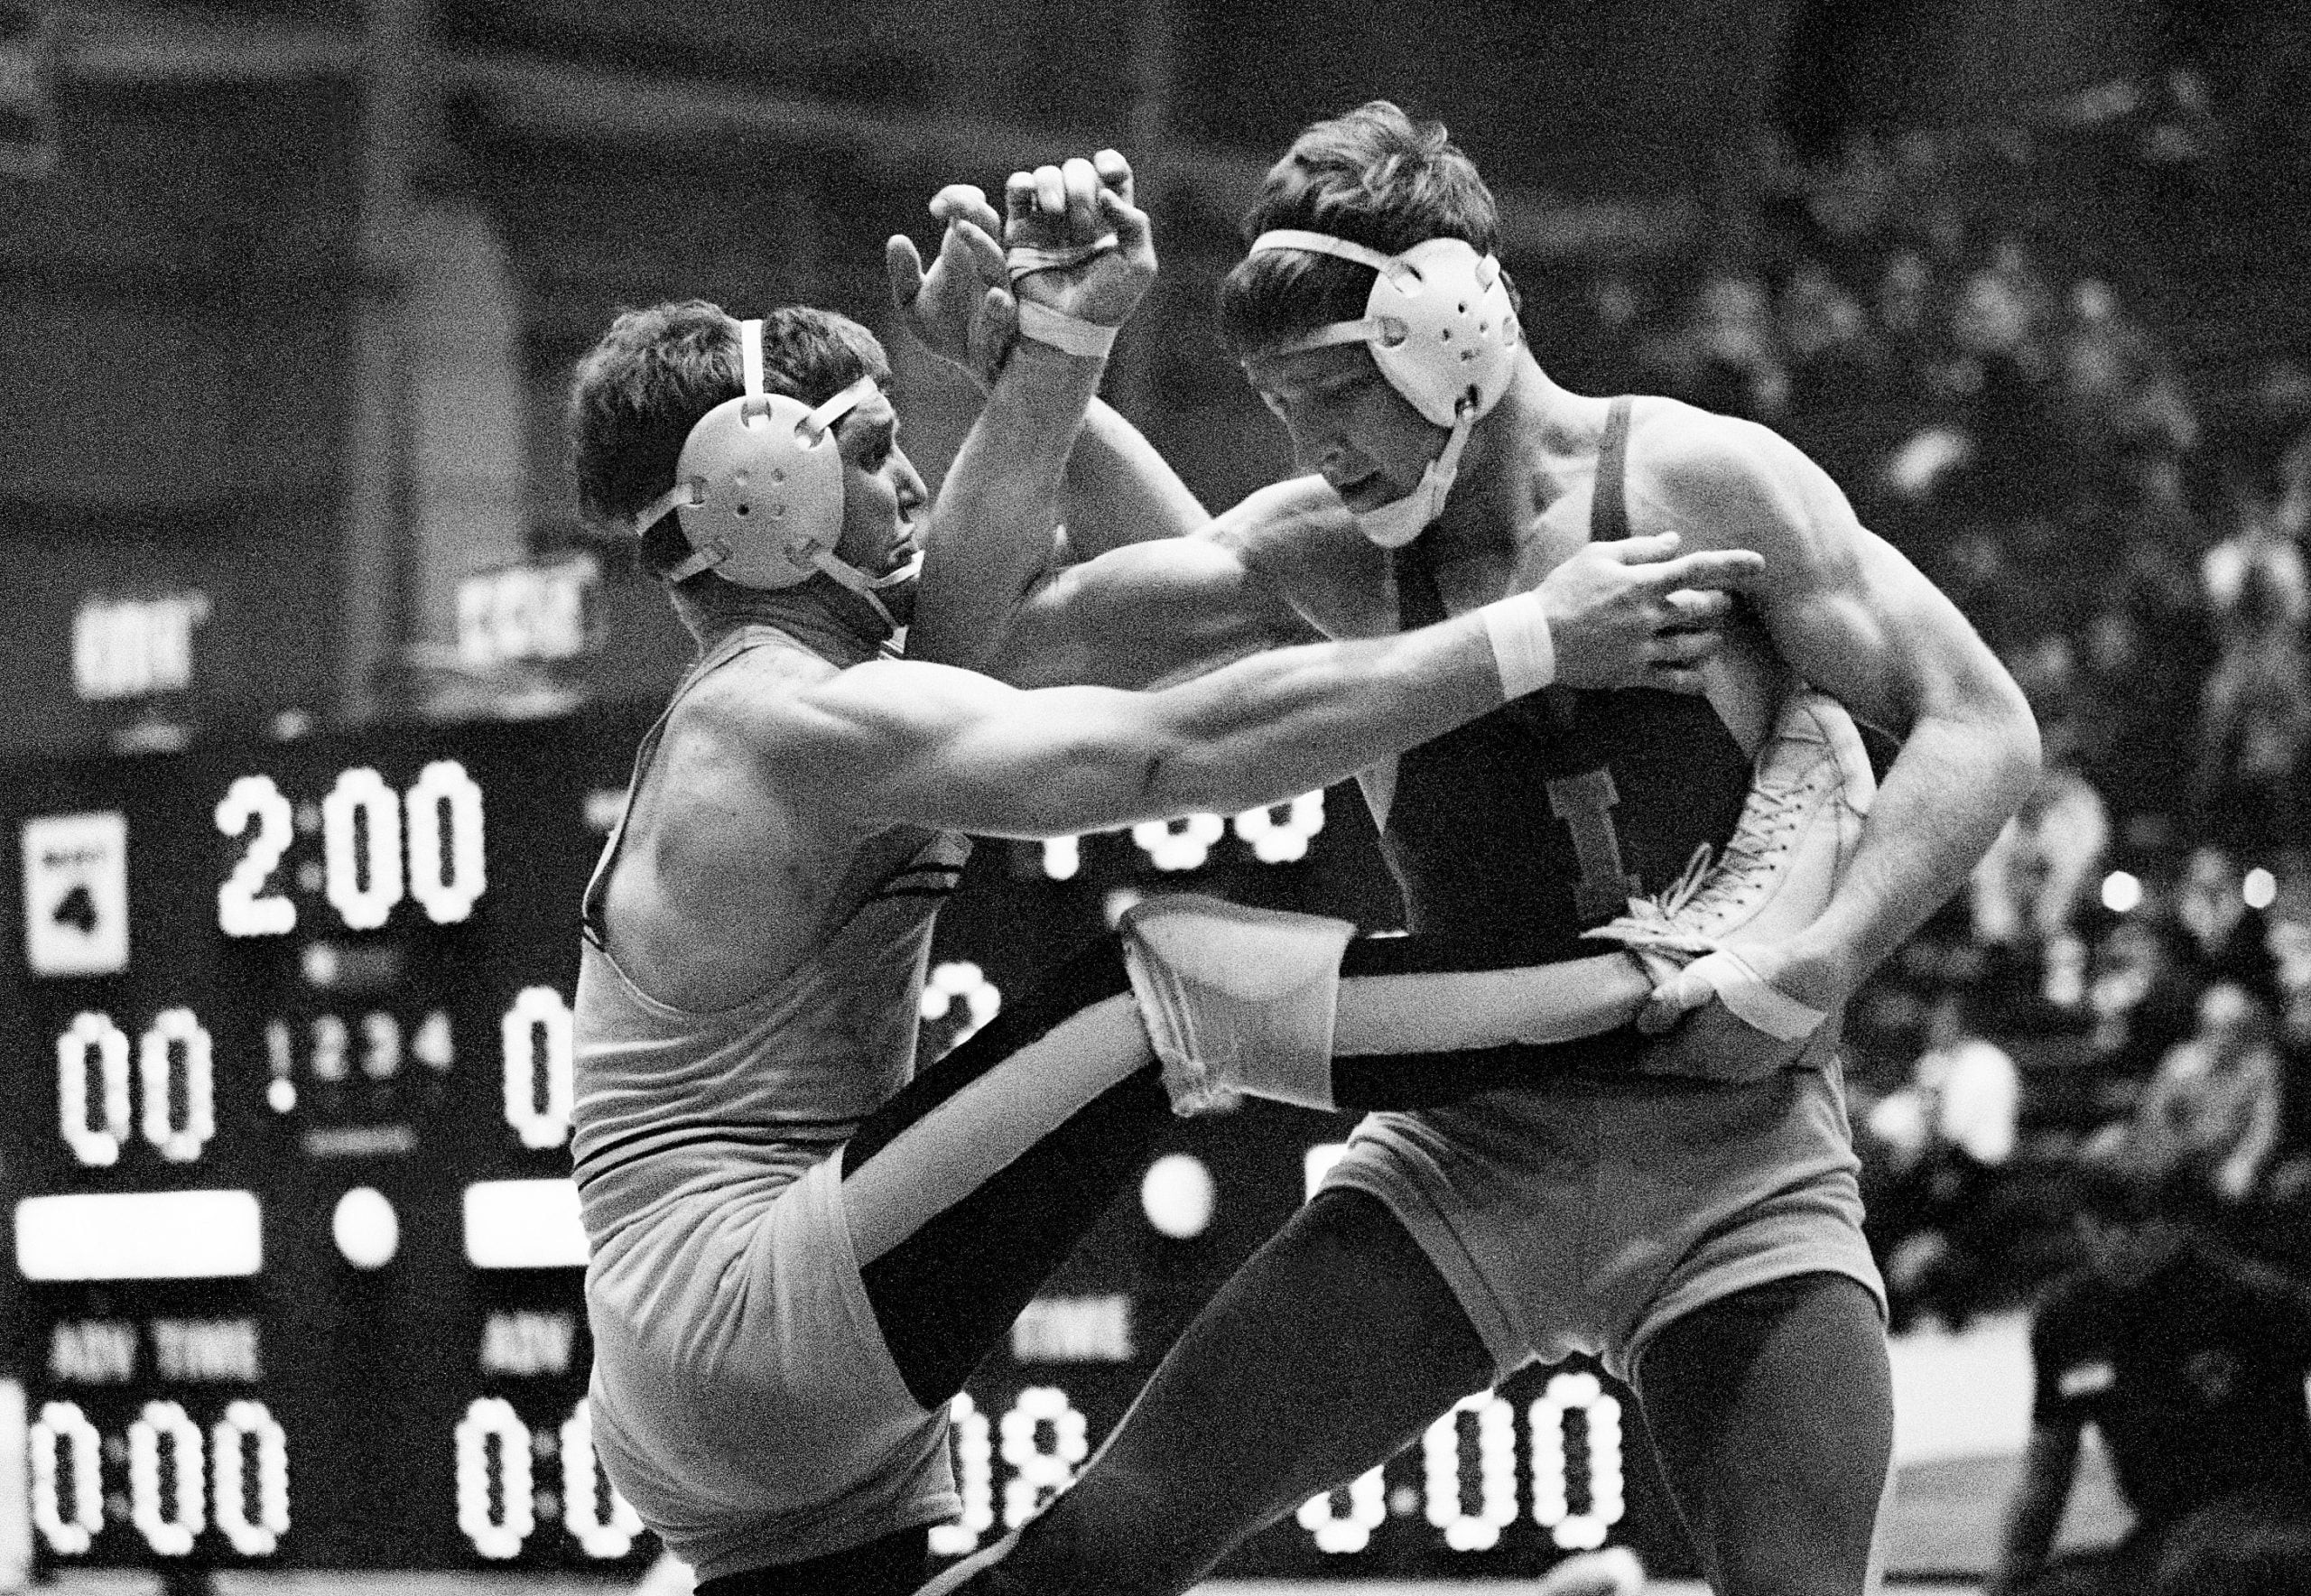 Trump to Present Dan Gable, Iowa Wrestling Legend, with Presidential Medal of Freedom 1